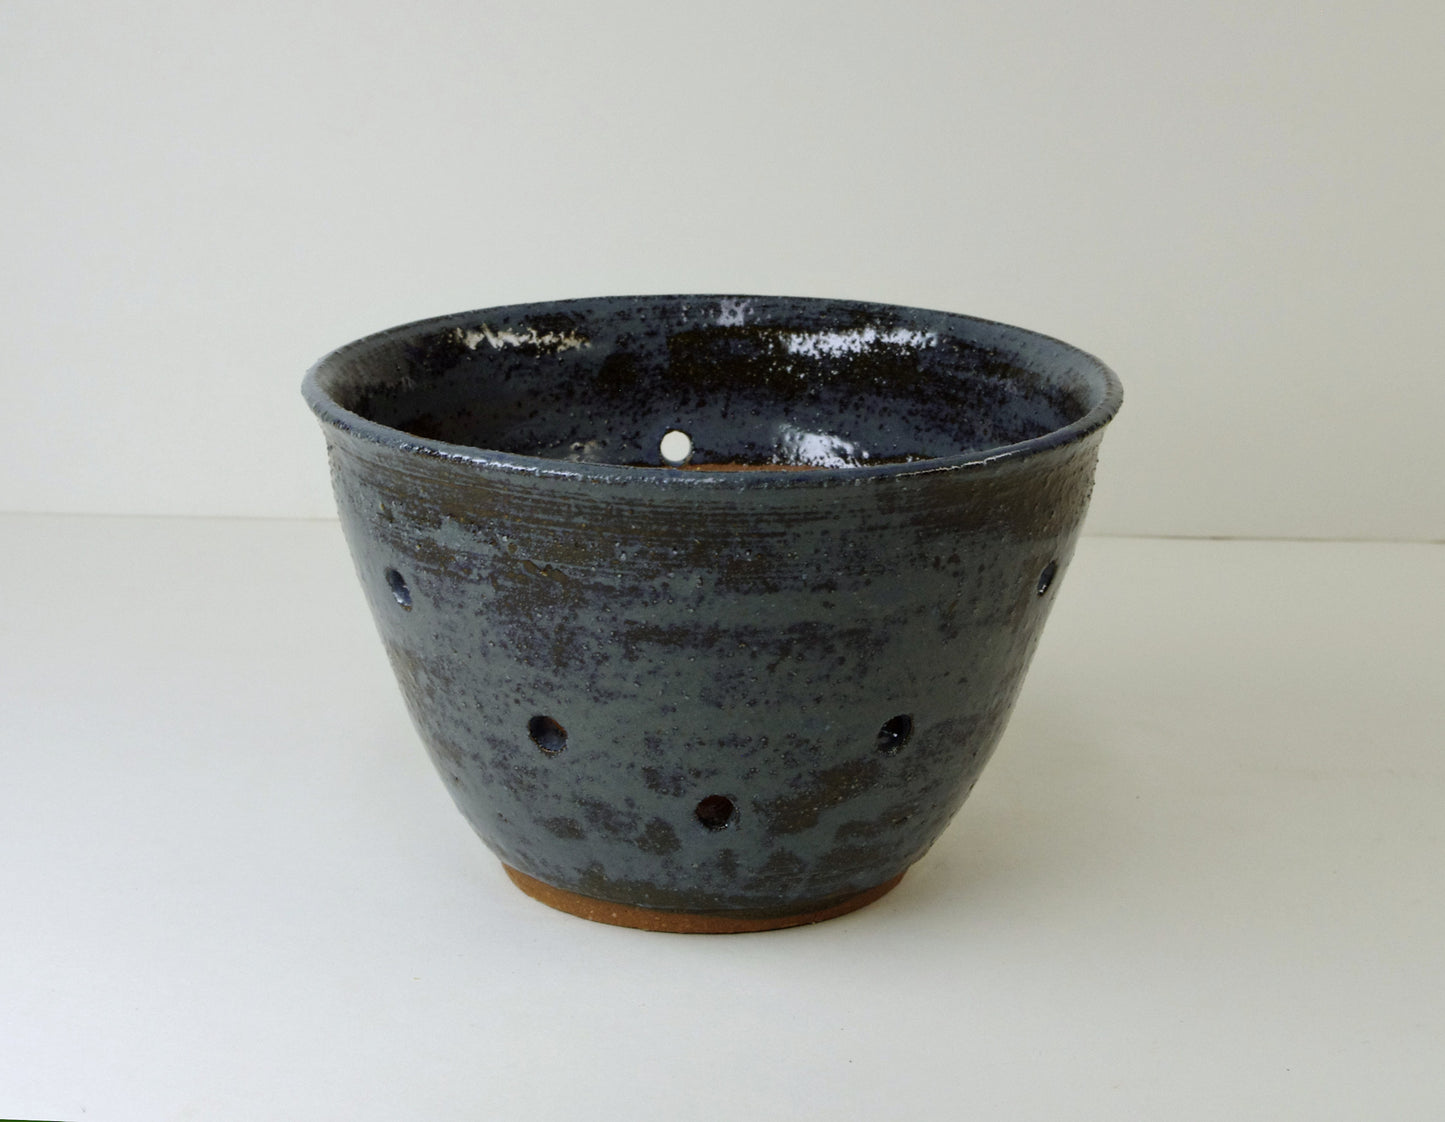 12096, Hand Thrown Stoneware Orchid Pot, Blues, Browns, 5 1/2 x 3 1/2